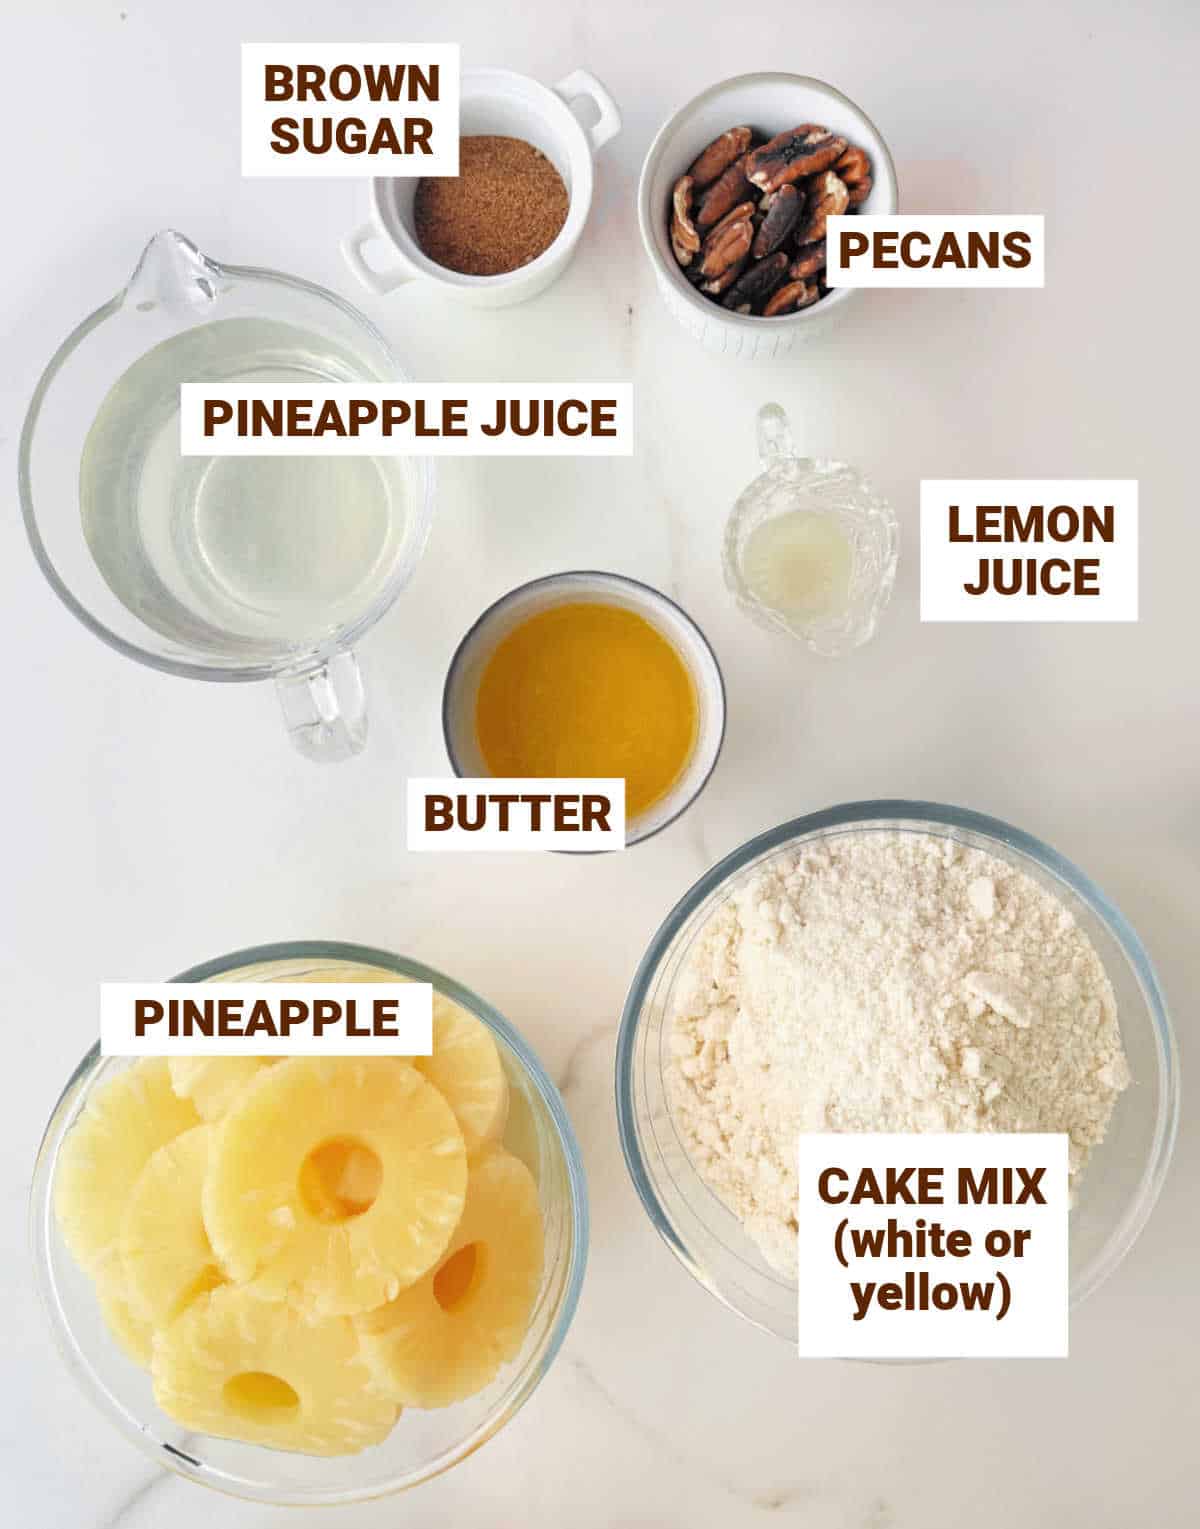 White marble surface with bowls containing ingredients for pineapple dump cake including pecans, butter, lemon juice, cake mix, brown sugar.